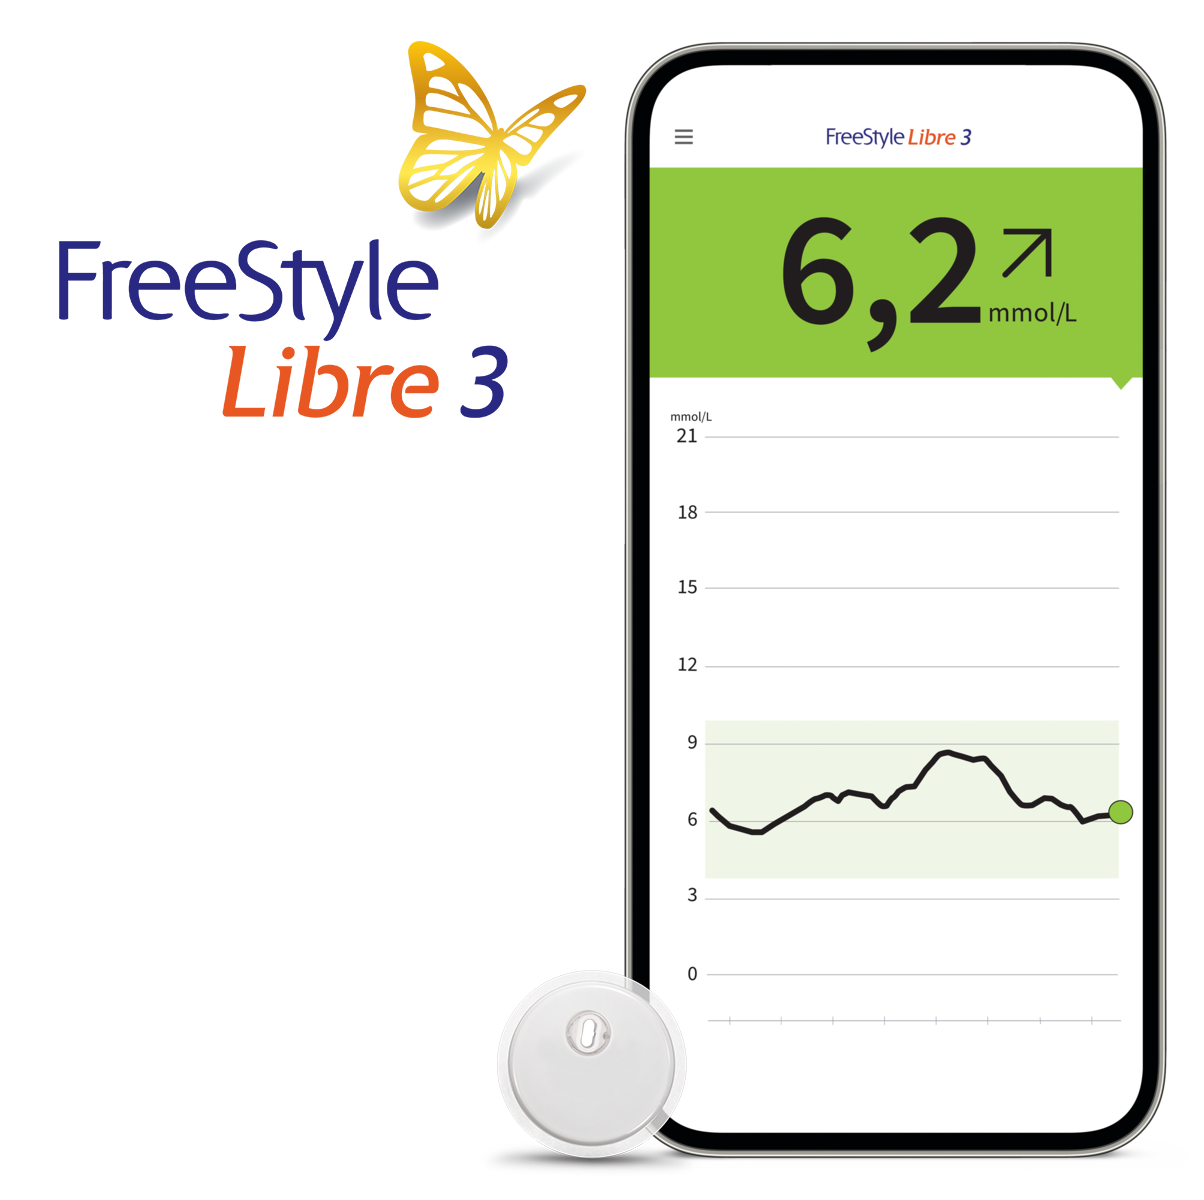 FreeStyle Libre 3 System